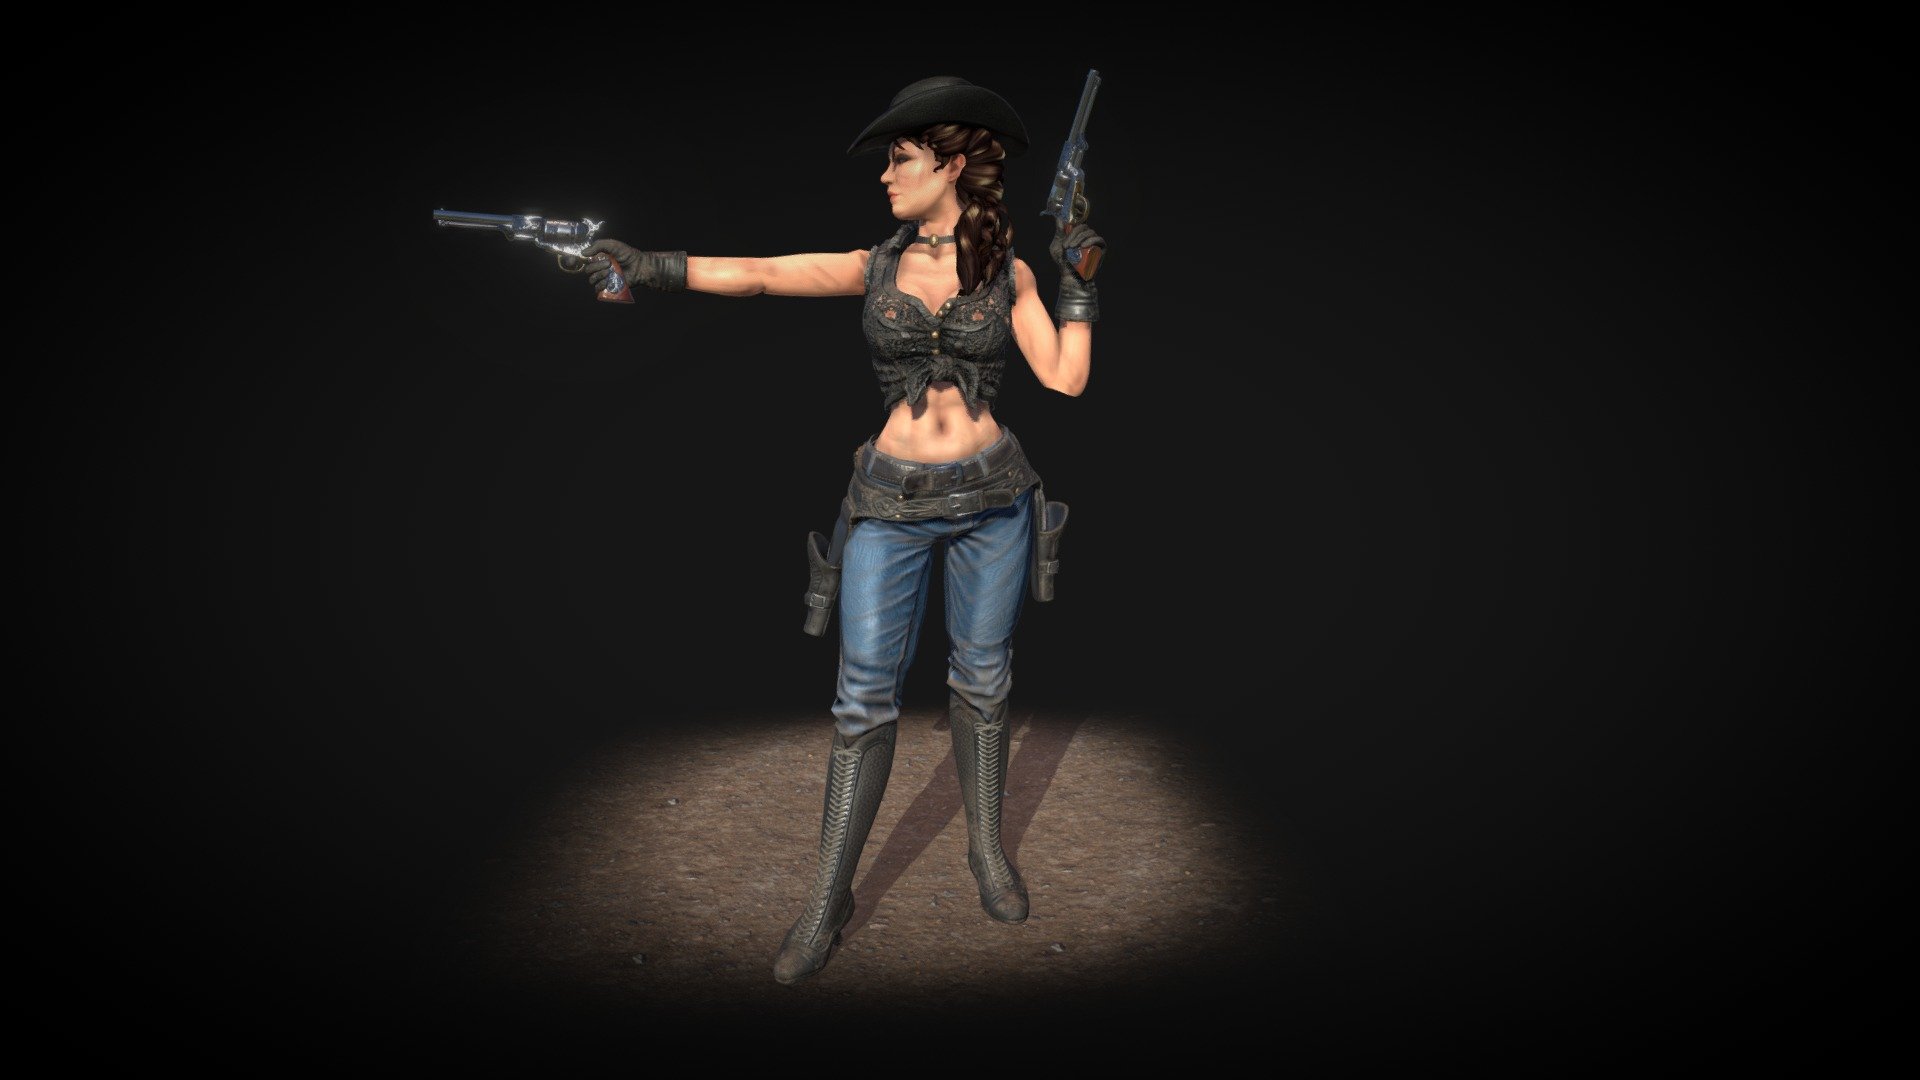 Cowgirl 3d Model By Pvietto [3802721] Sketchfab